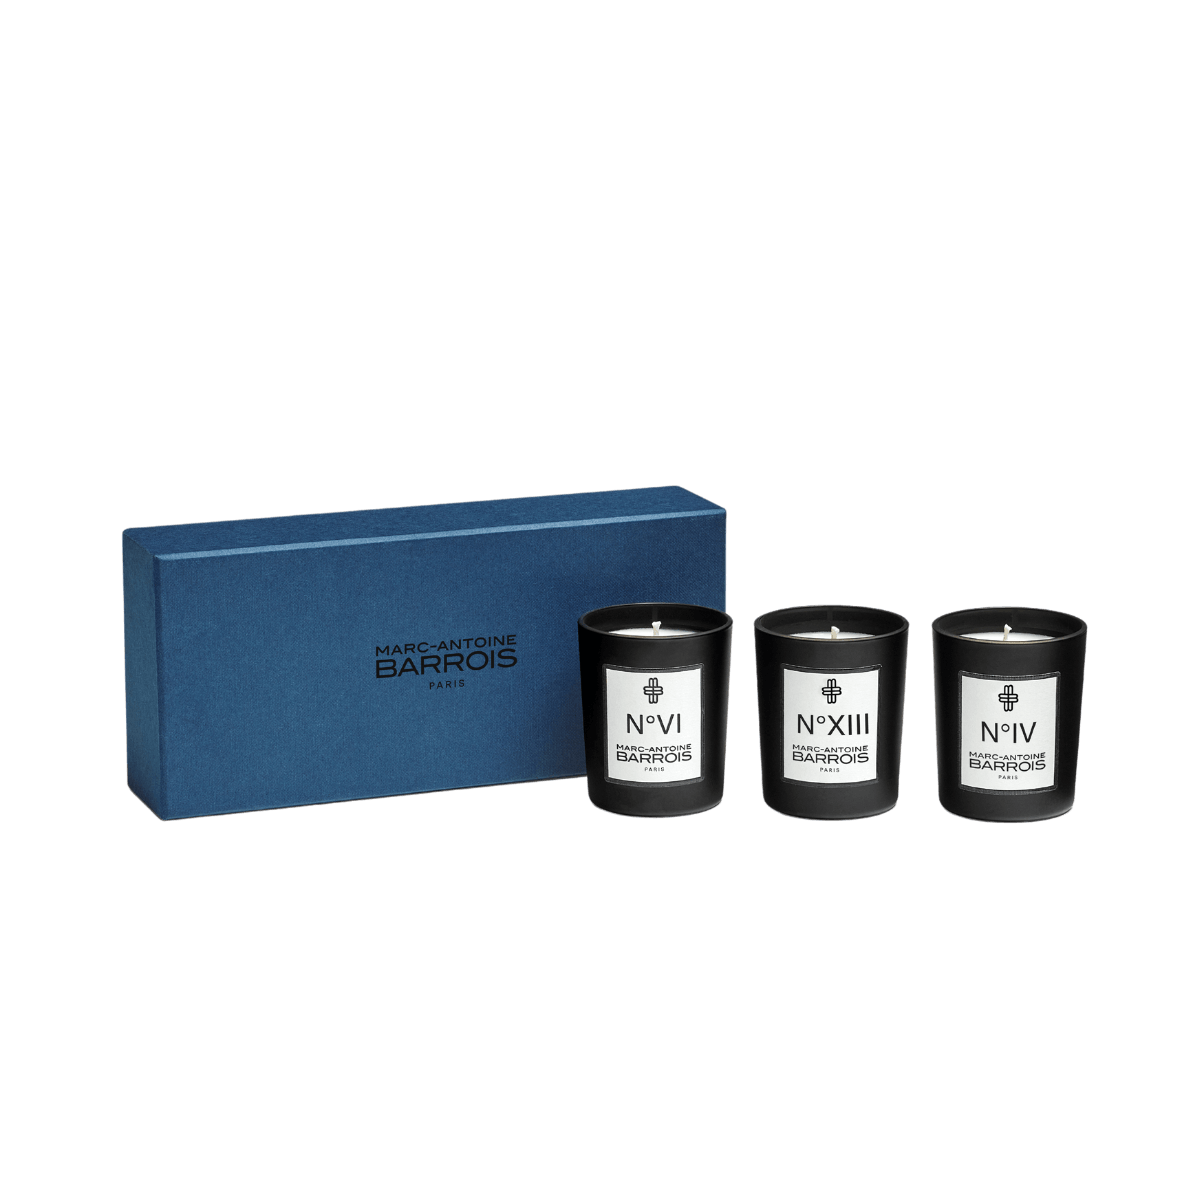 Image of Trio of scented candles by the perfume brand Marc-Antoine Barrois